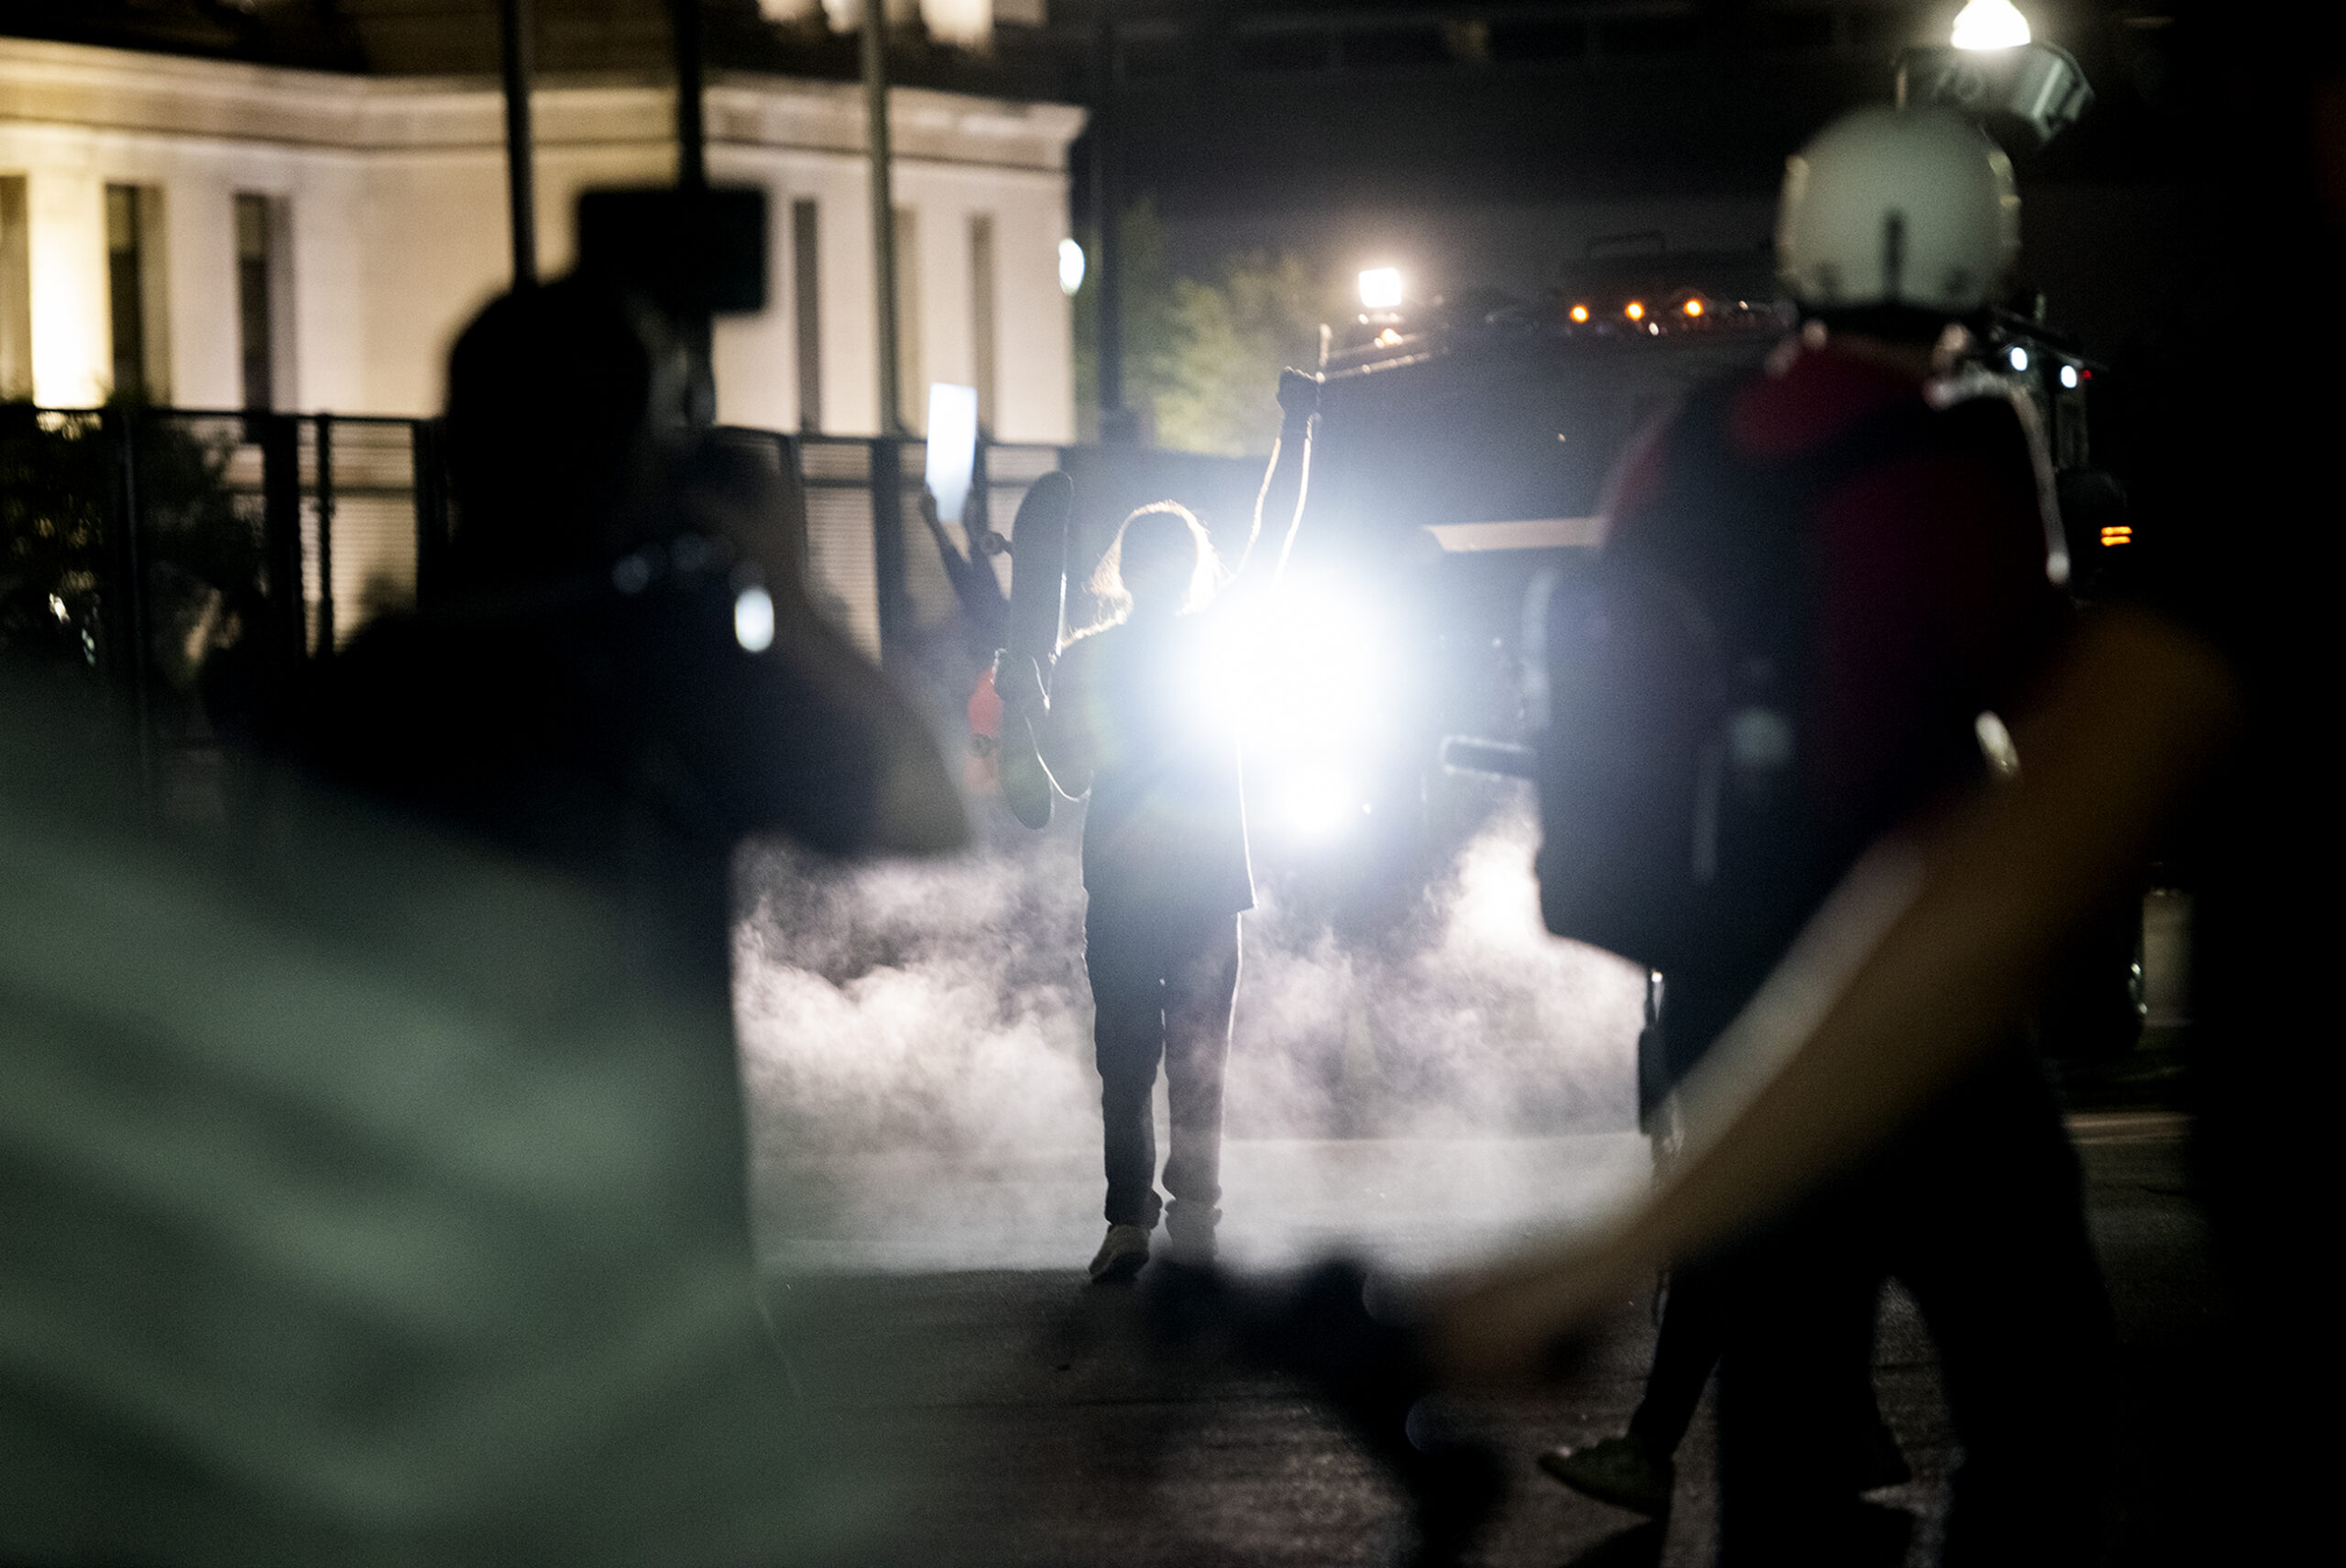 smoke surrounds a protester with a fist raised. they are seen in silhouette illuminated by a bearcat headlight.